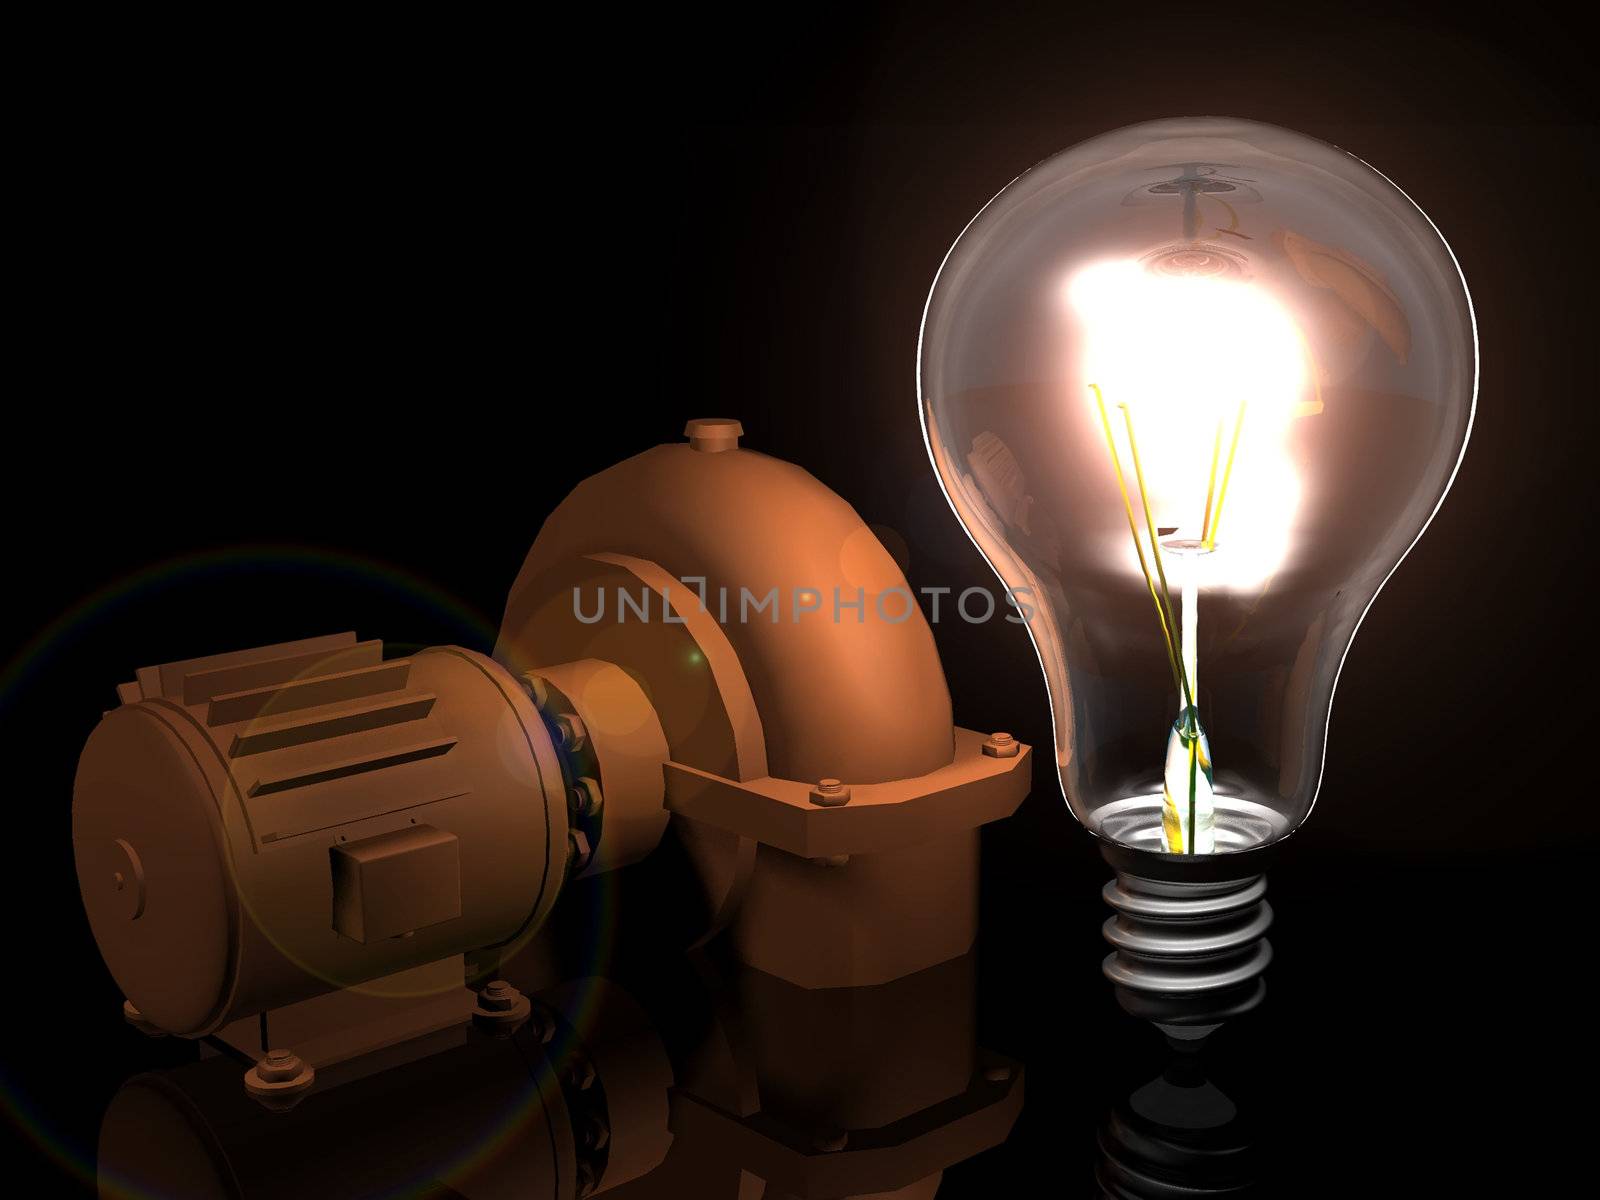 the light bulb and the motor